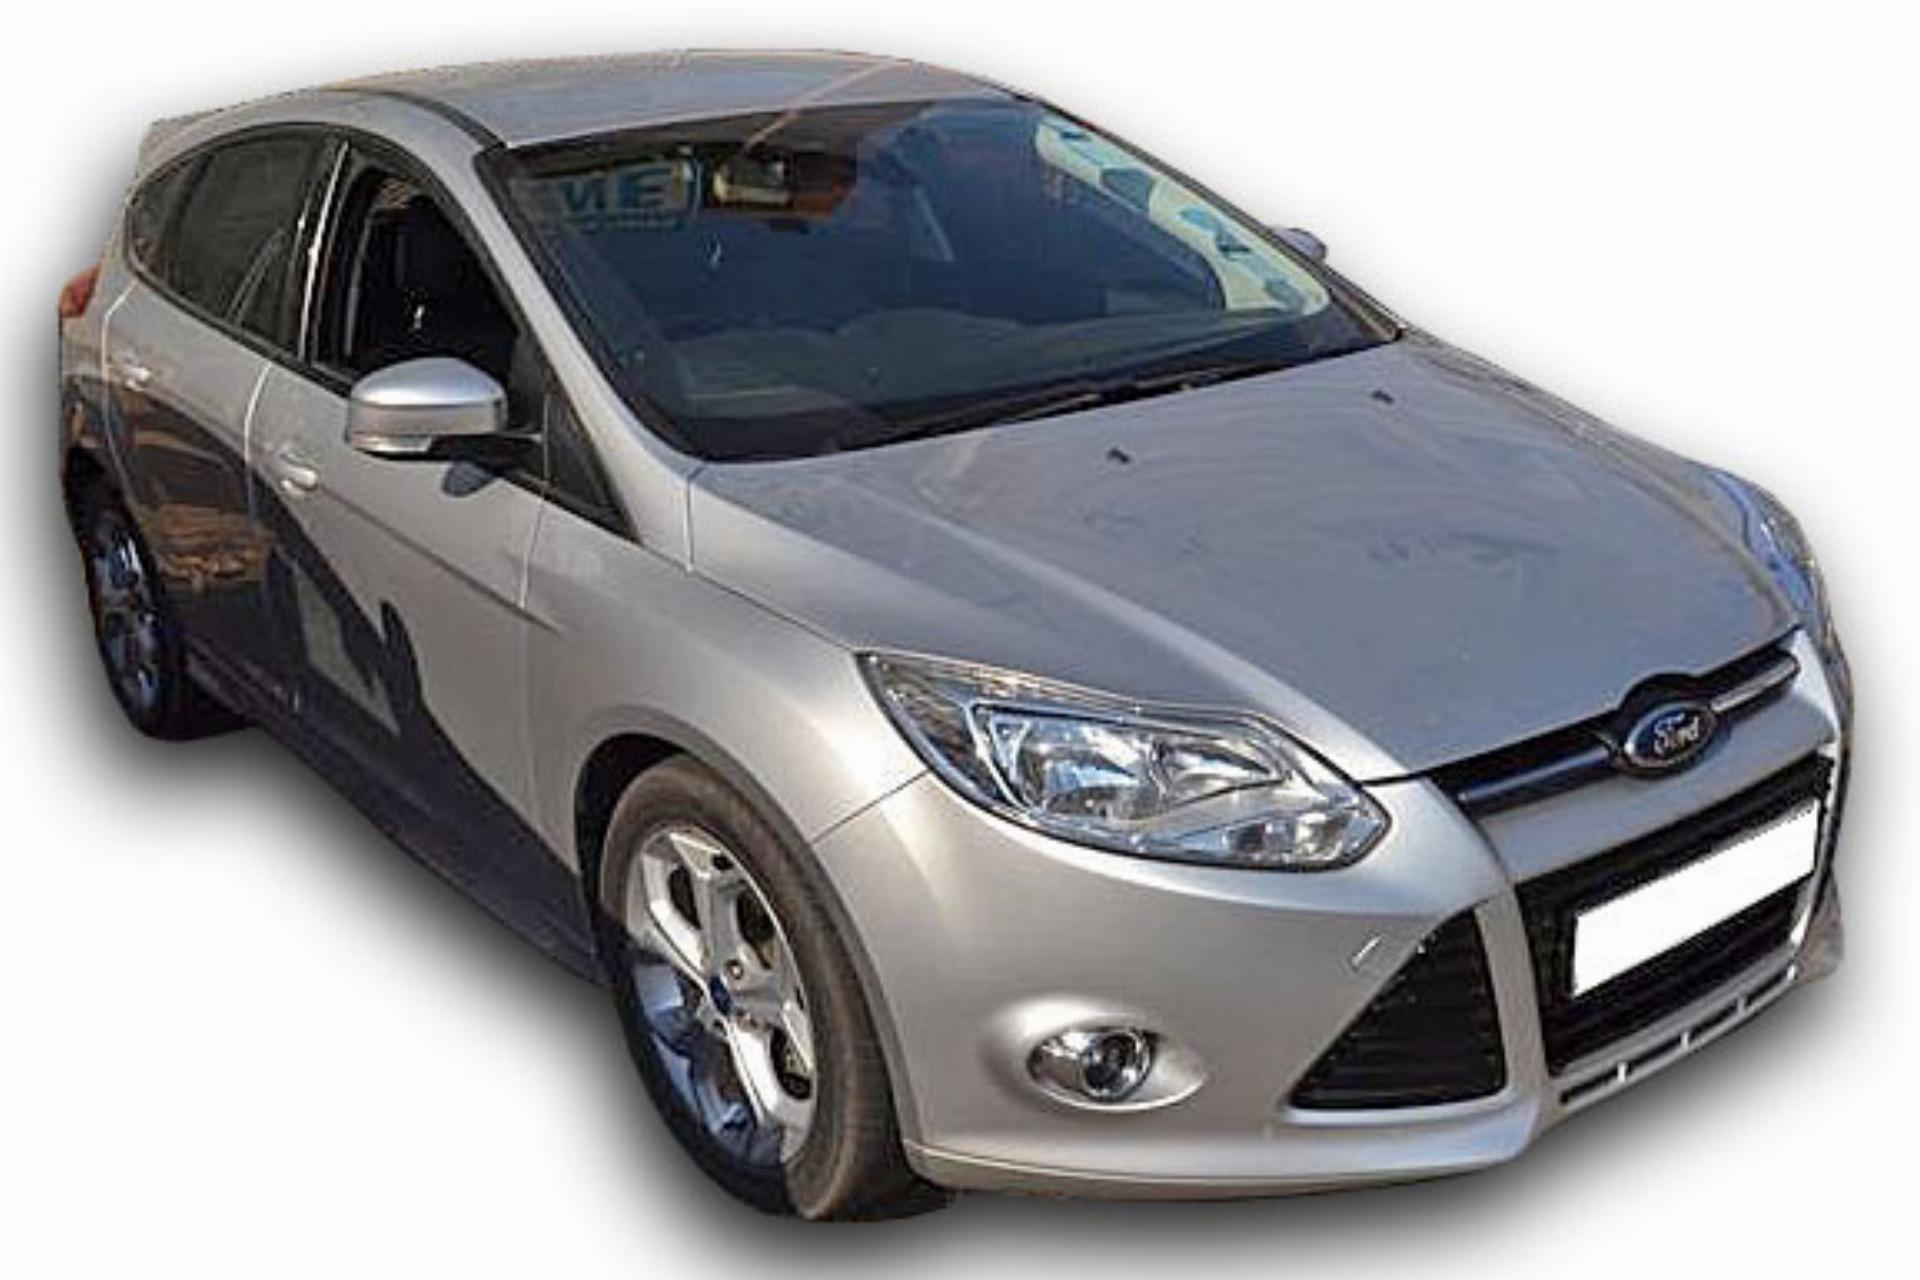 Ford Focus 2.0 Gdi Trend 5DR